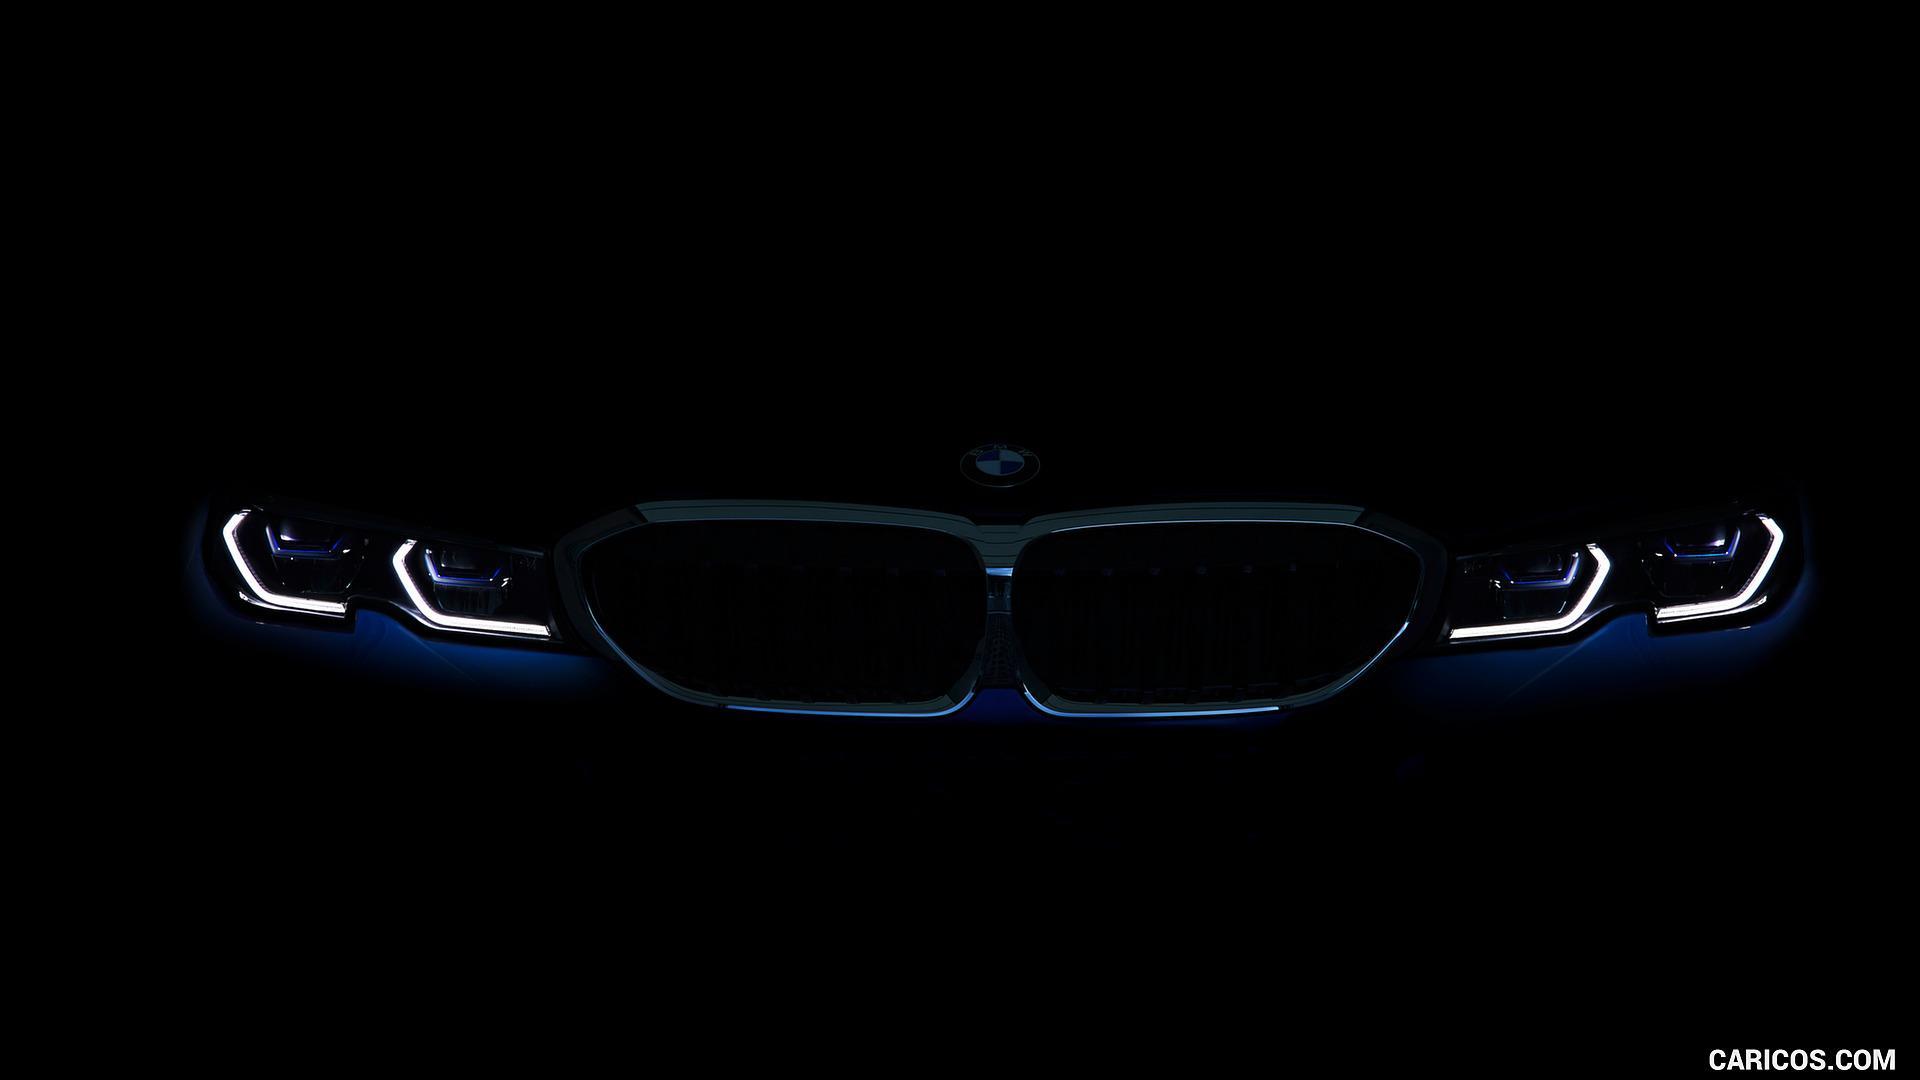 Bmw Lights Wallpapers Top Free Bmw Lights Backgrounds Wallpaperaccess